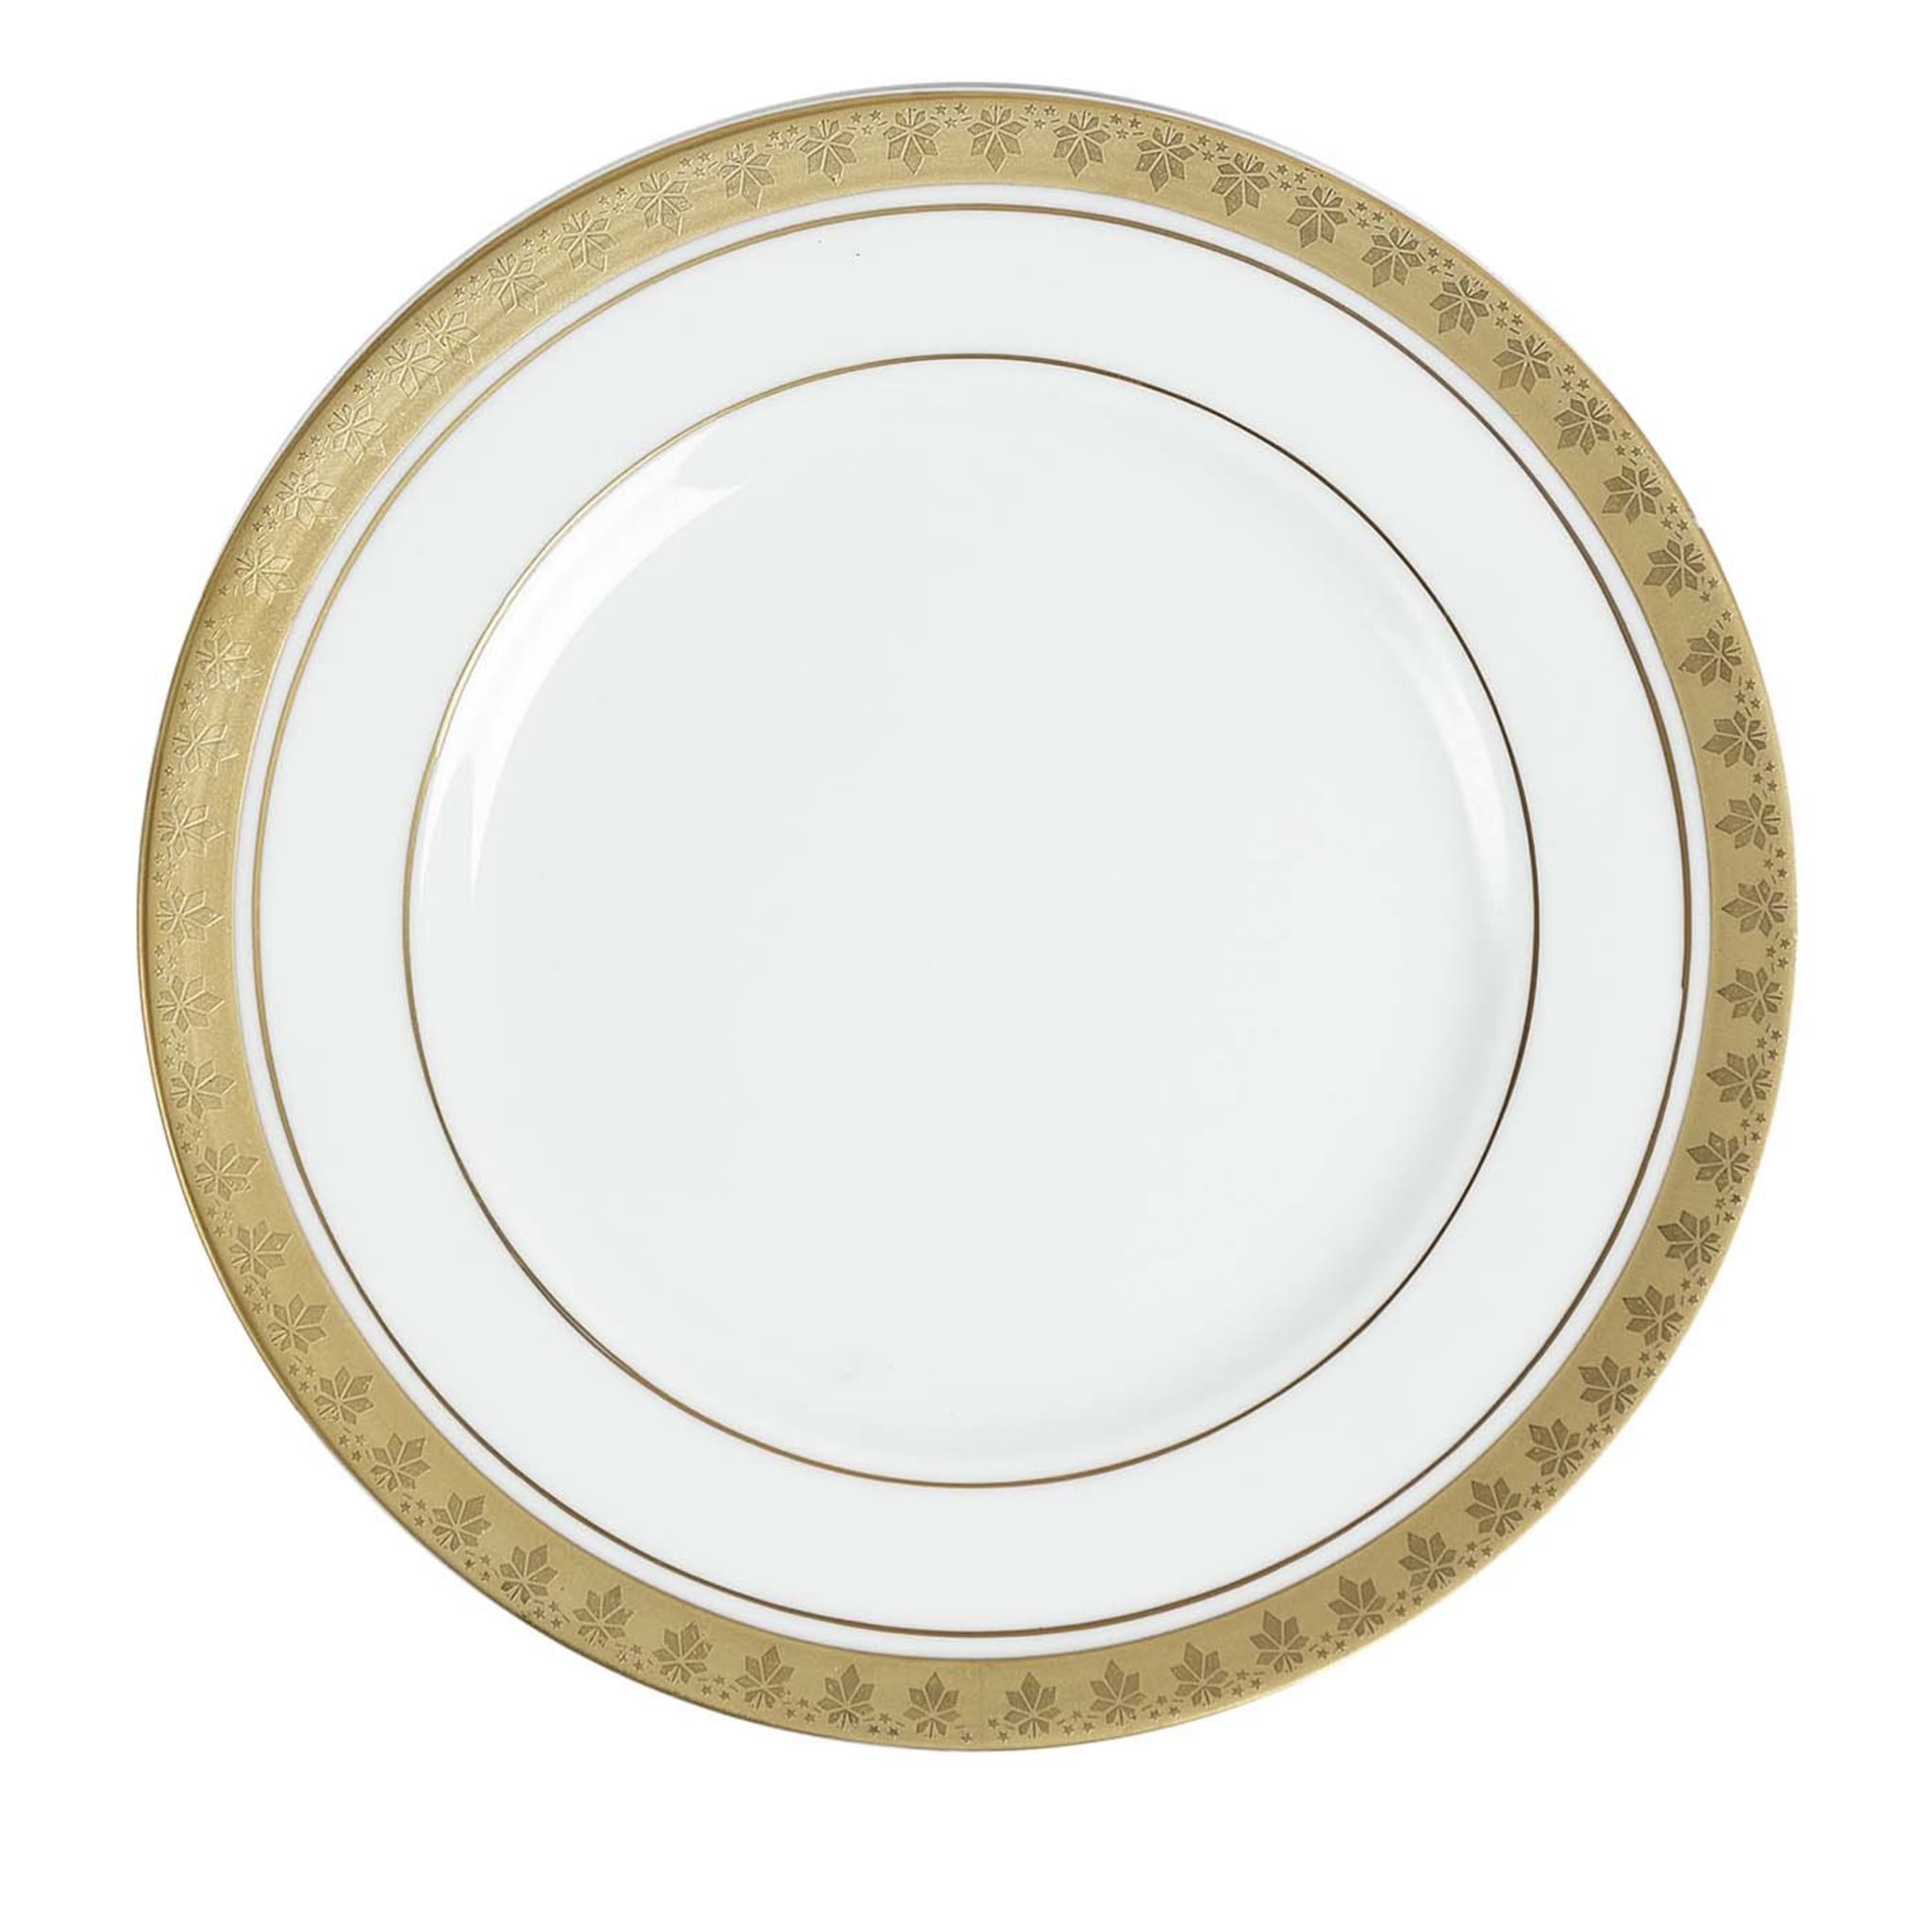 Set of 6 White&Gold Dinner Plates - Main view